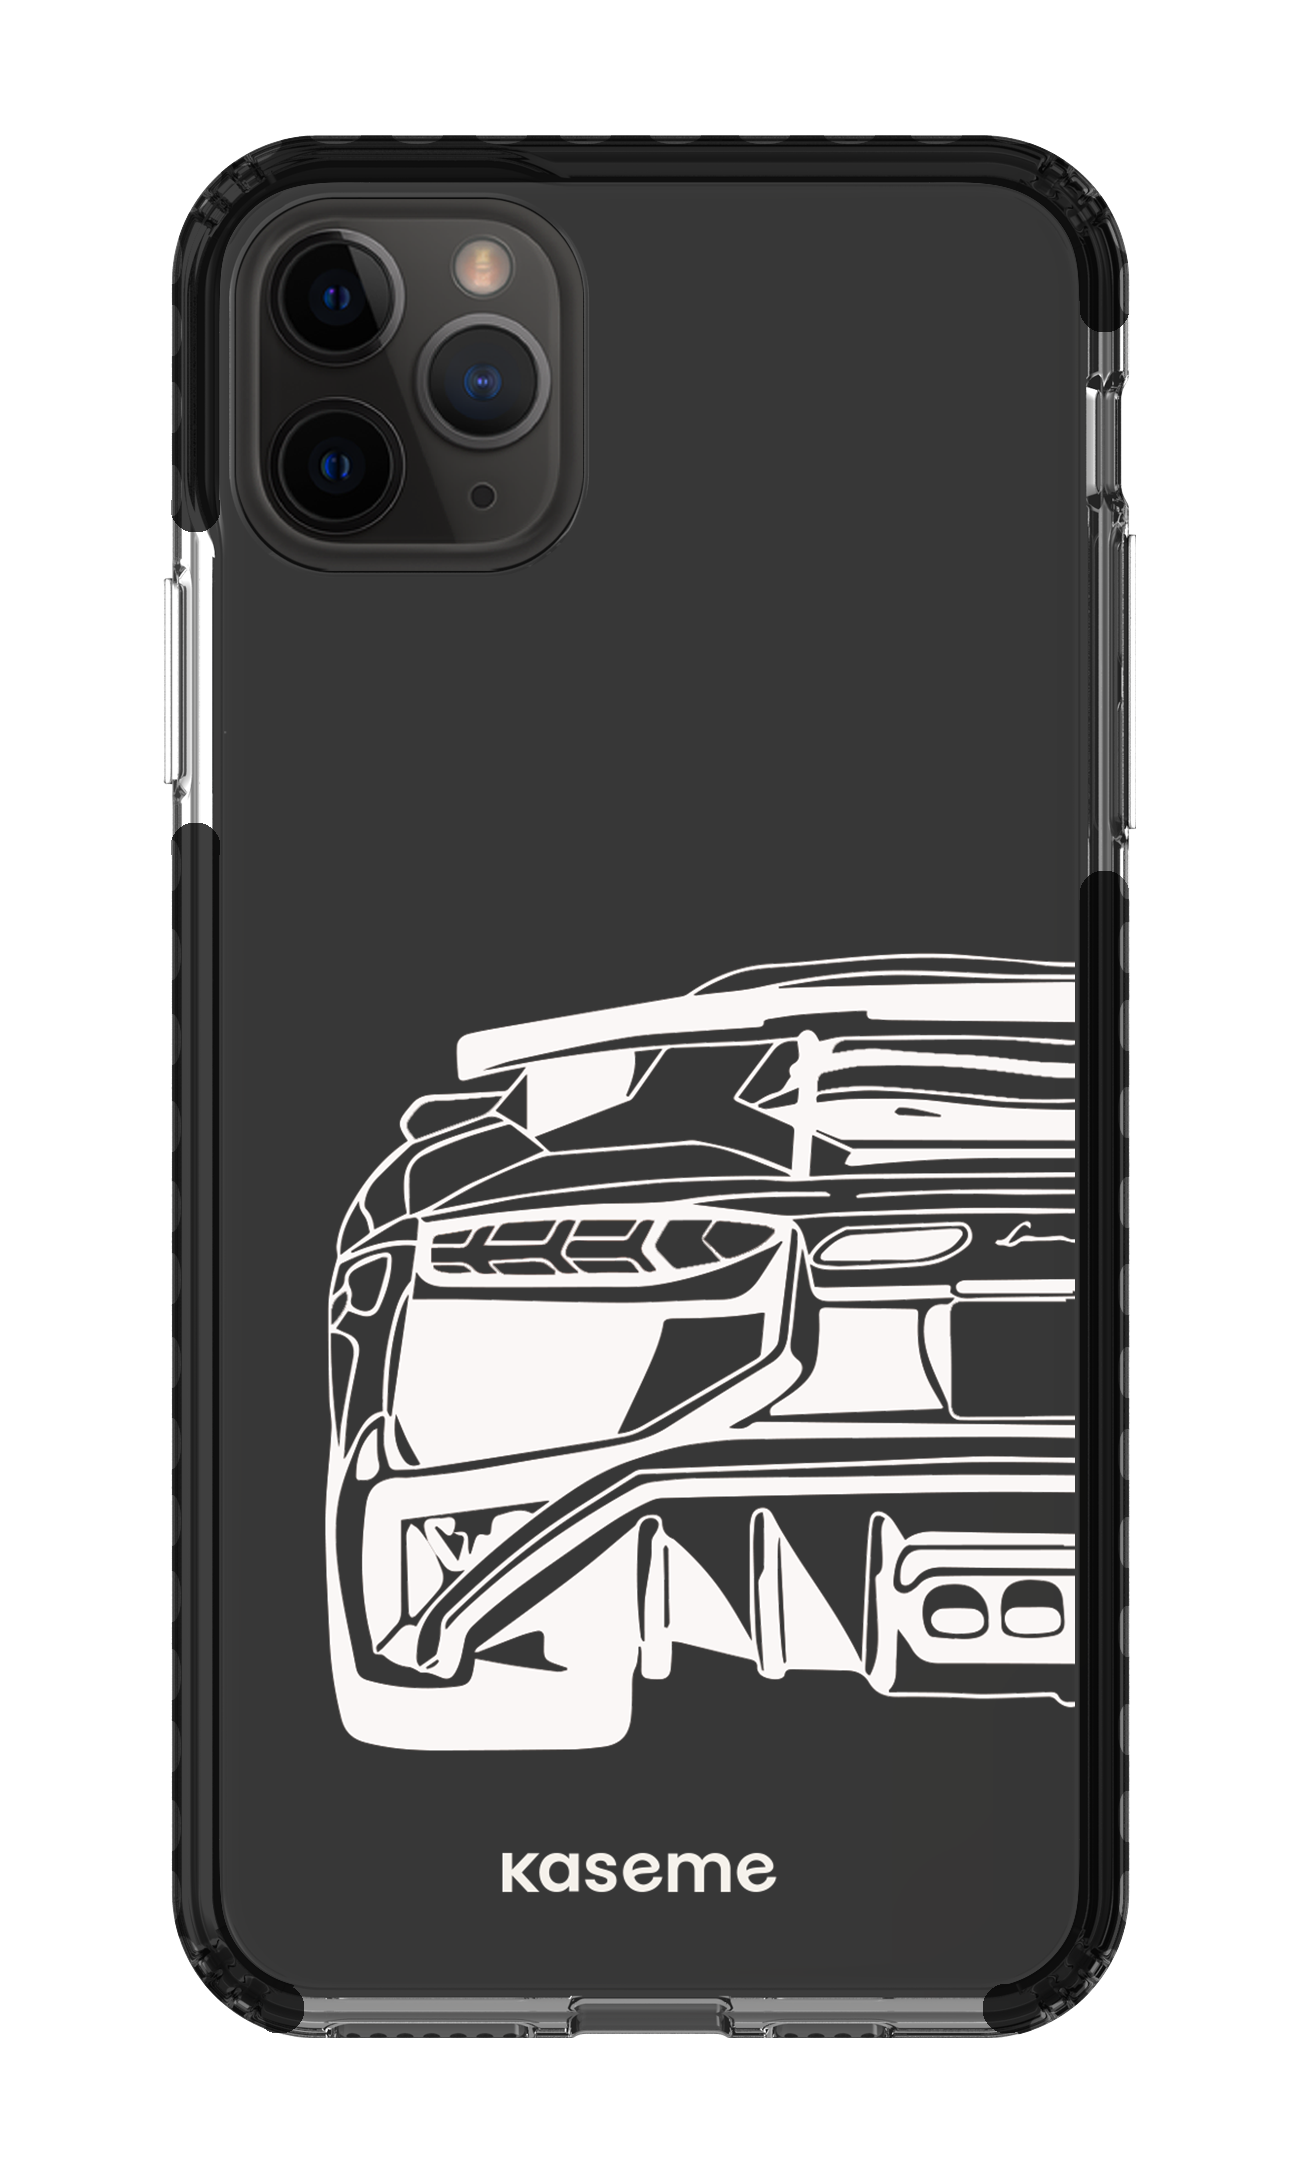 Lambo clear case - iPhone 11 pro Max